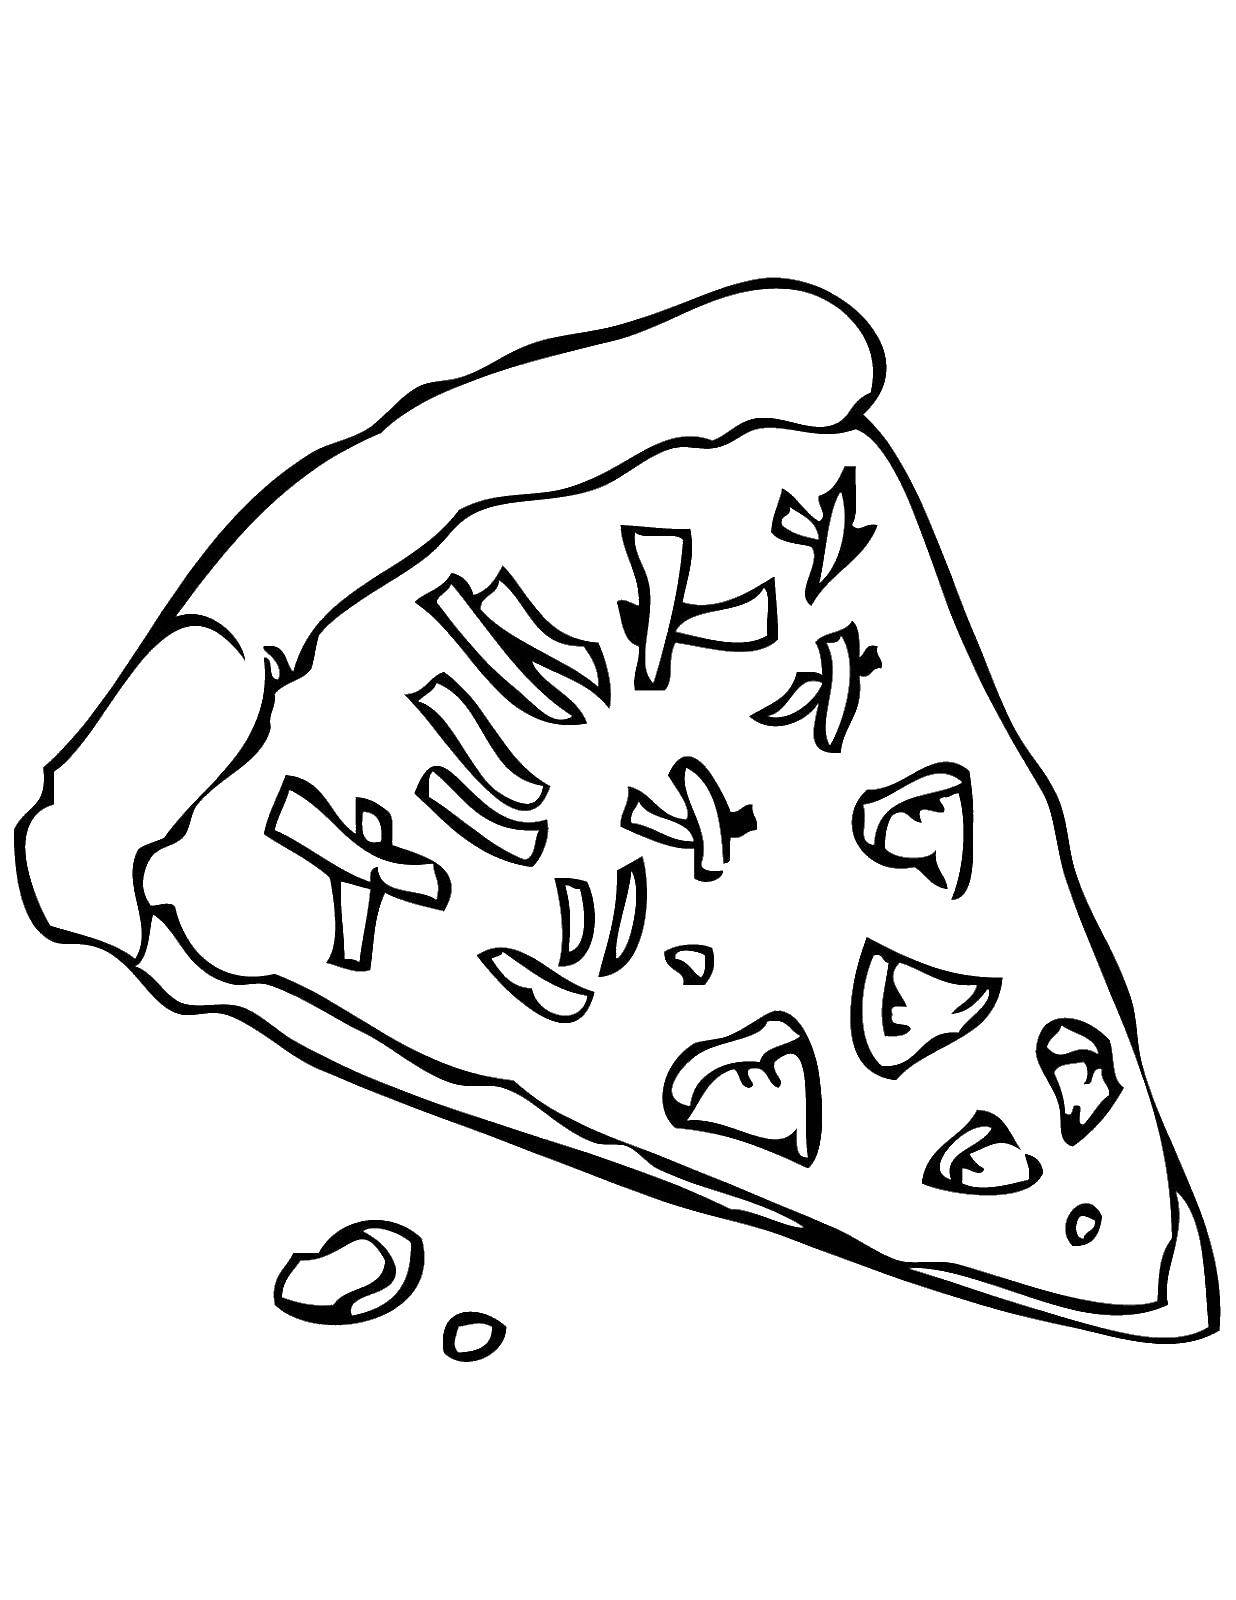 Coloring A slice of pizza. Category The food. Tags:  pizza, food.